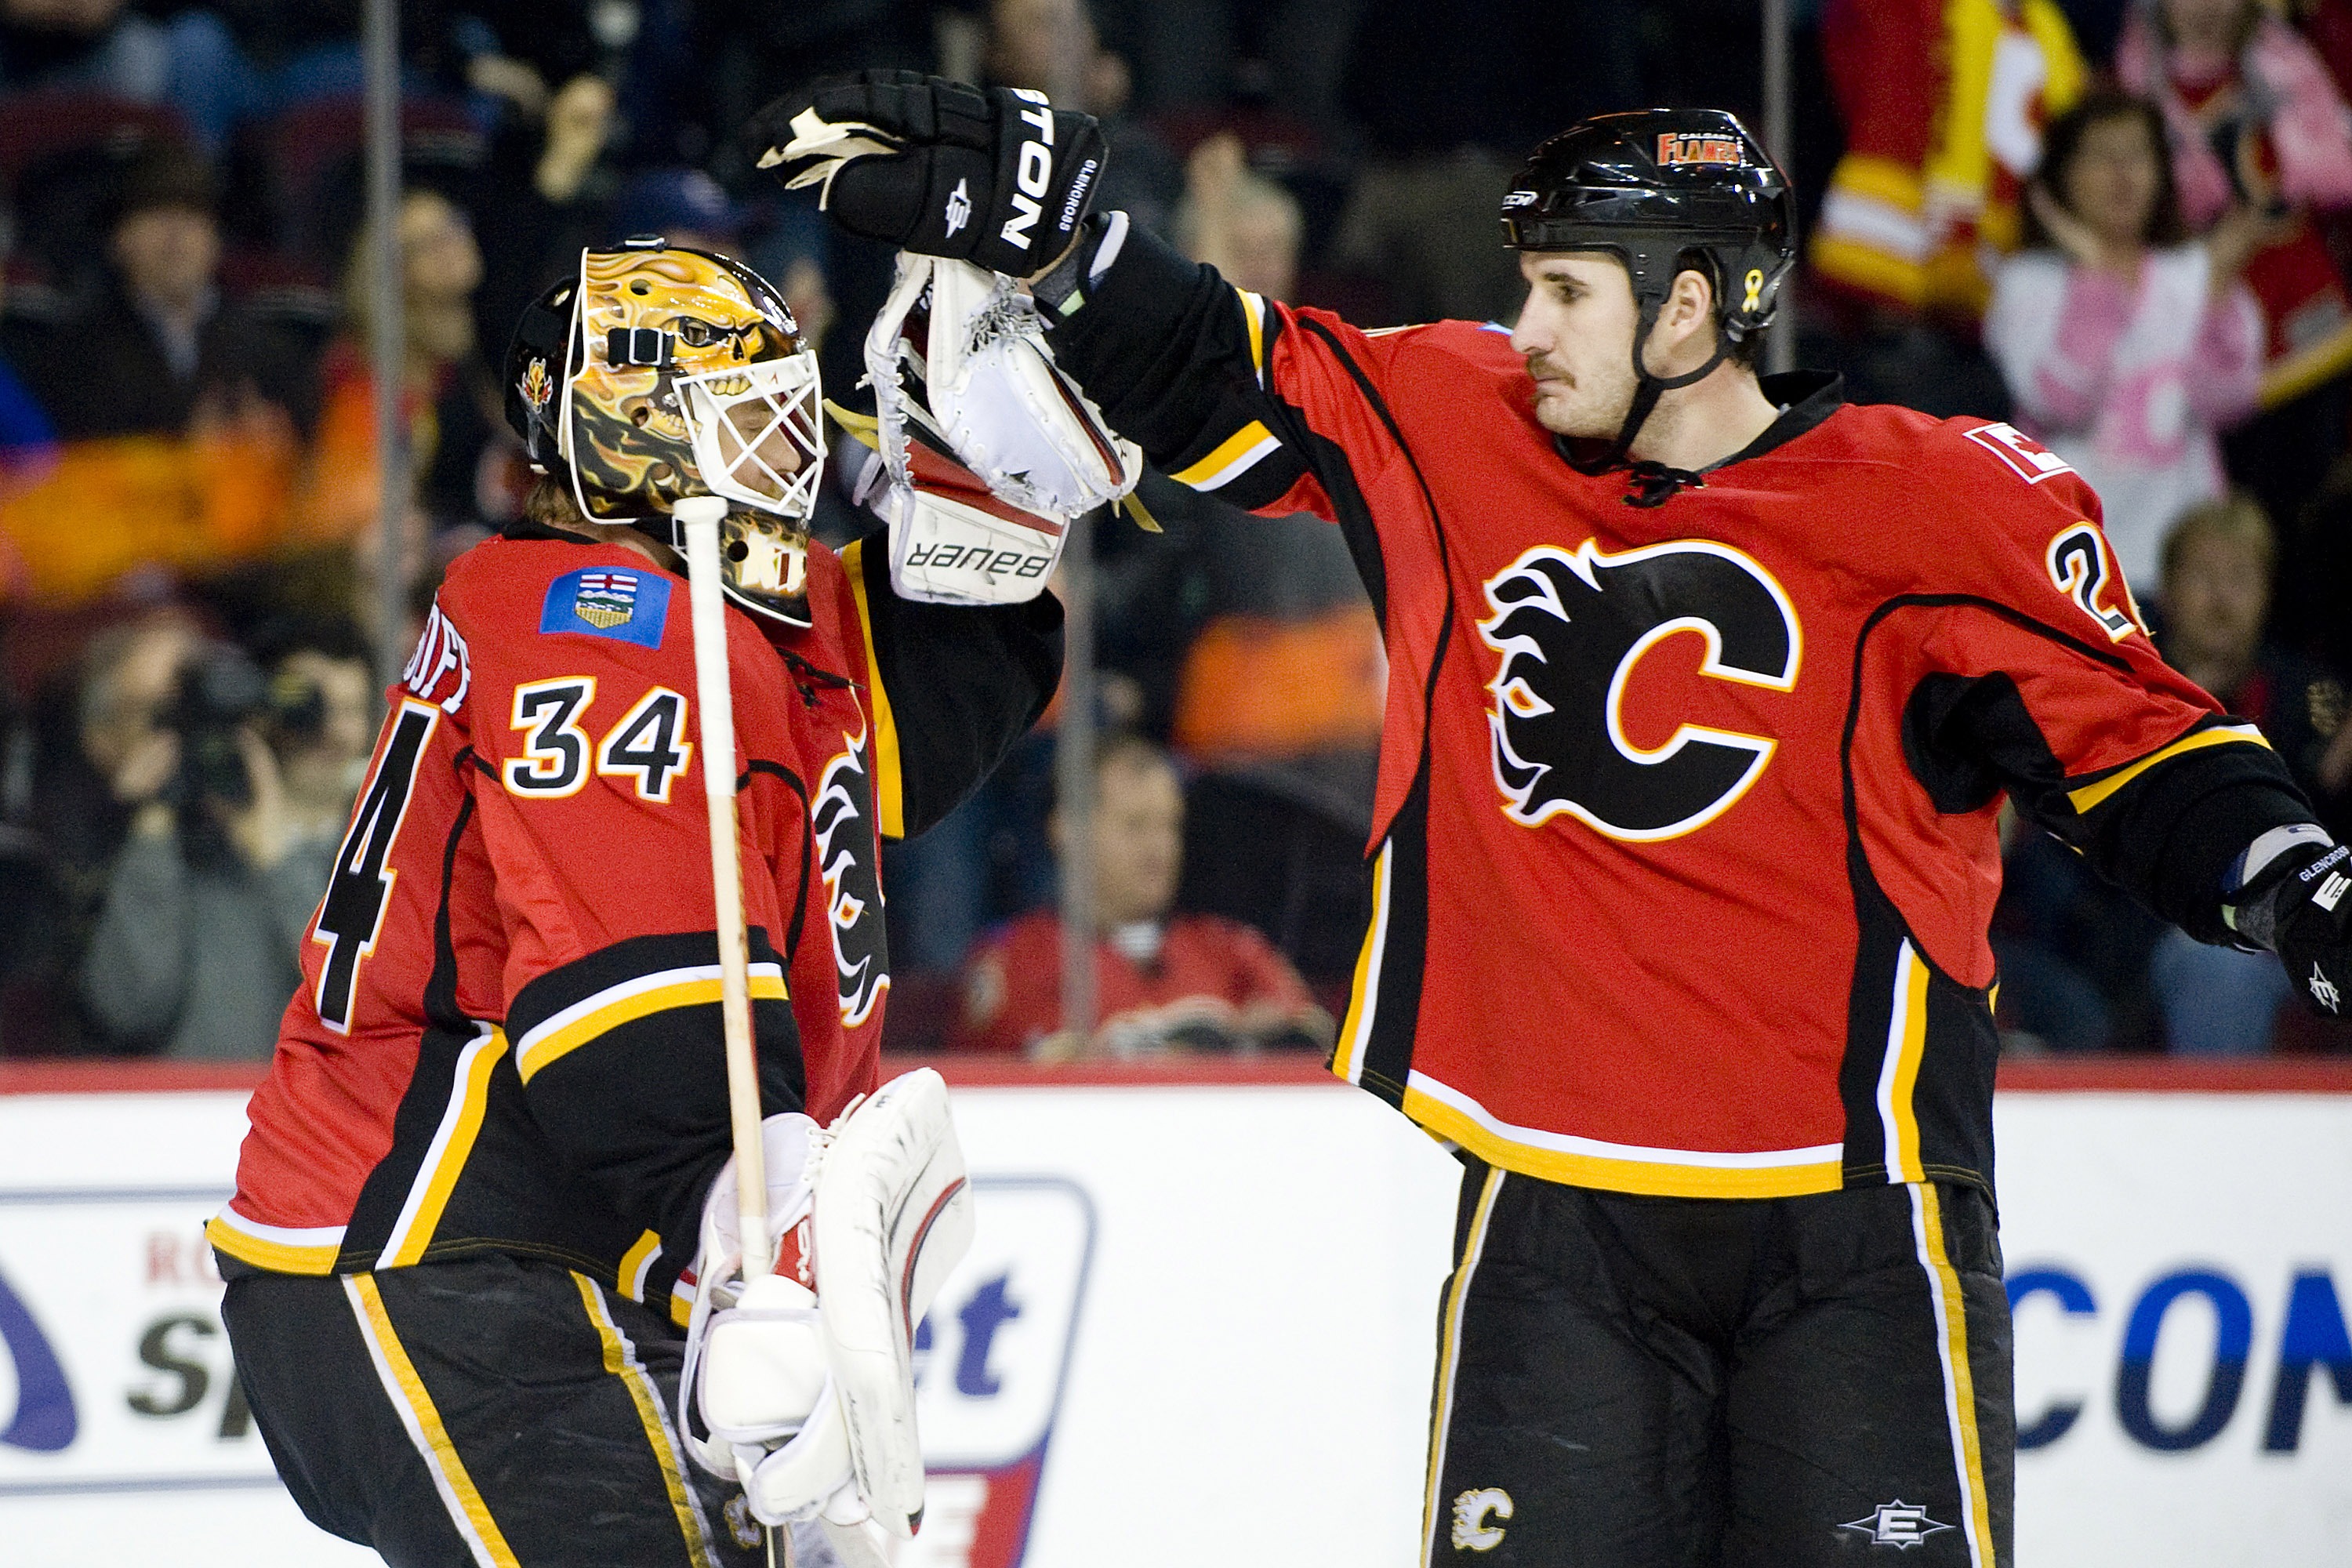 EDMONTON, AB - NOVEMBER 29:  Curtis Glencross #20 congratulates Miikka Kiprusoff #34 of the Calgary Flames after his shut-out performance against the Minnesota Wild at Scotiabank Saddledome on November 29, 2010 in Calgary, Alberta, Canada. The Flames beat